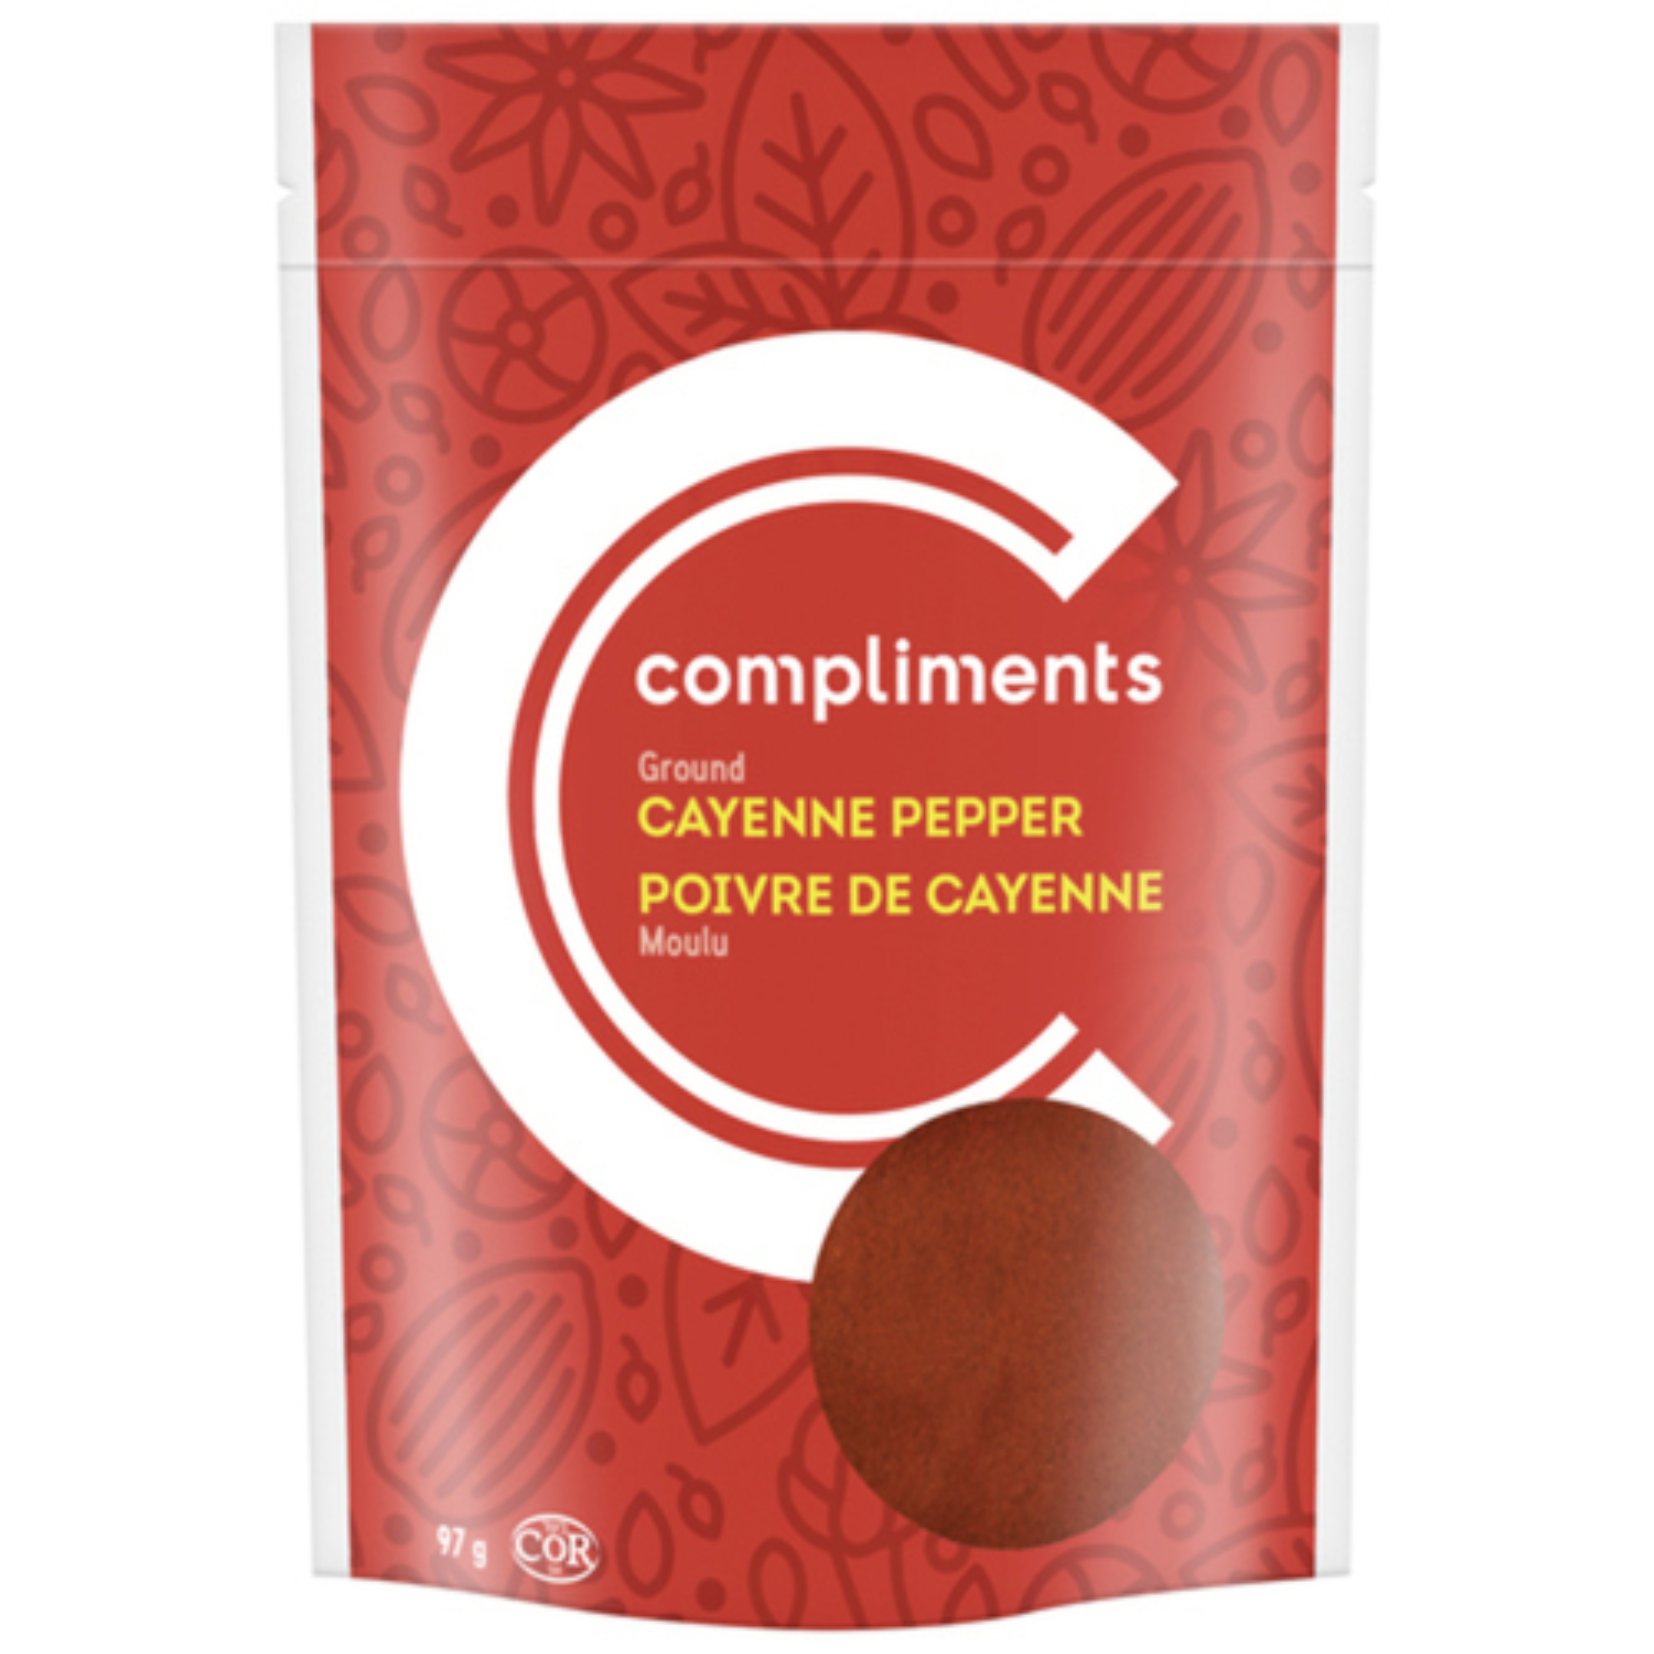 Compliments Cayenne Pepper 97g